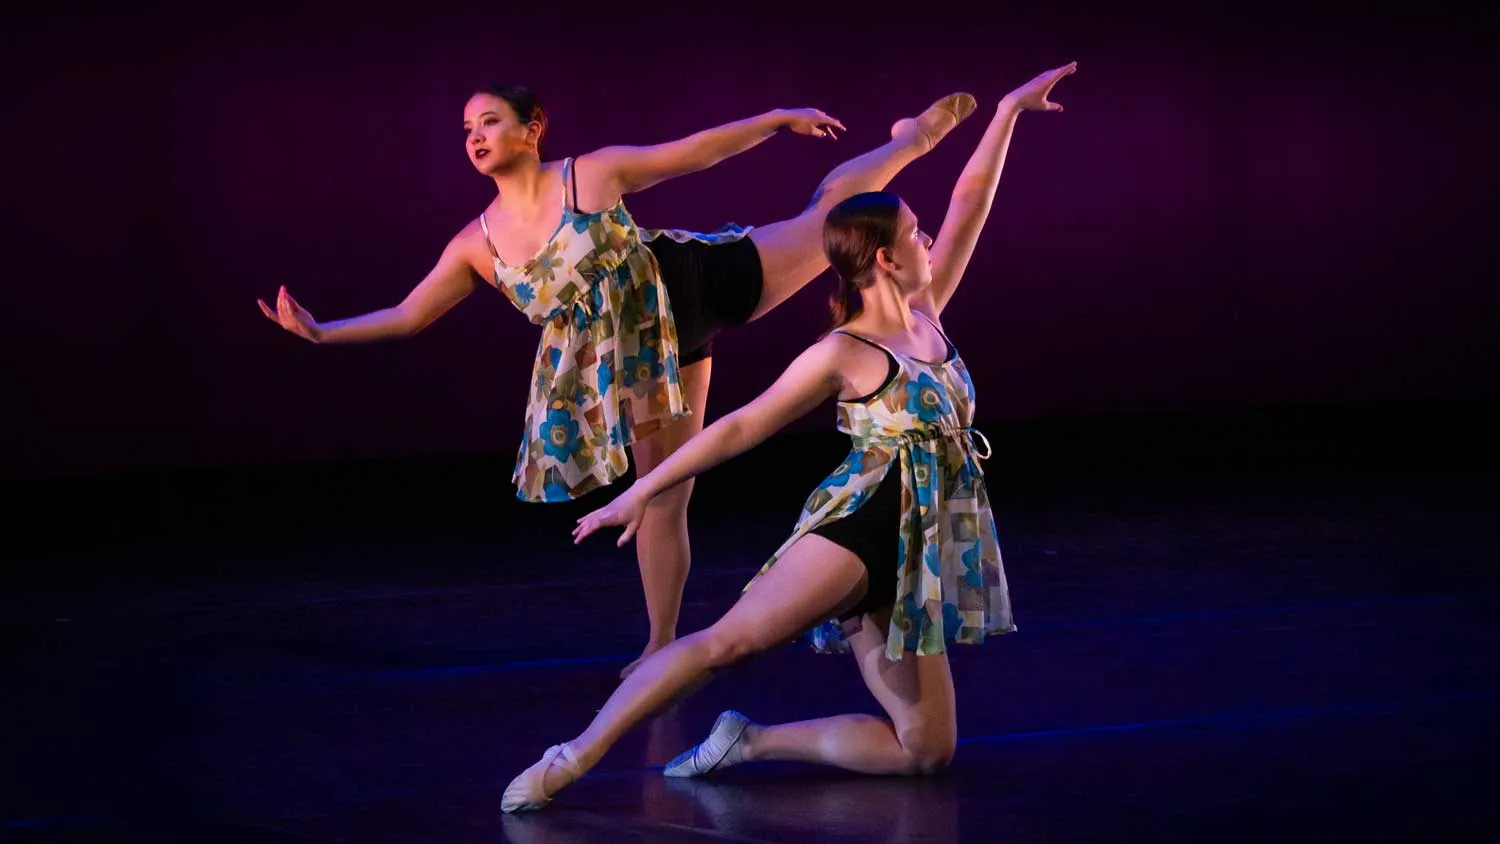 two women dancers on stage in ballet-like poses